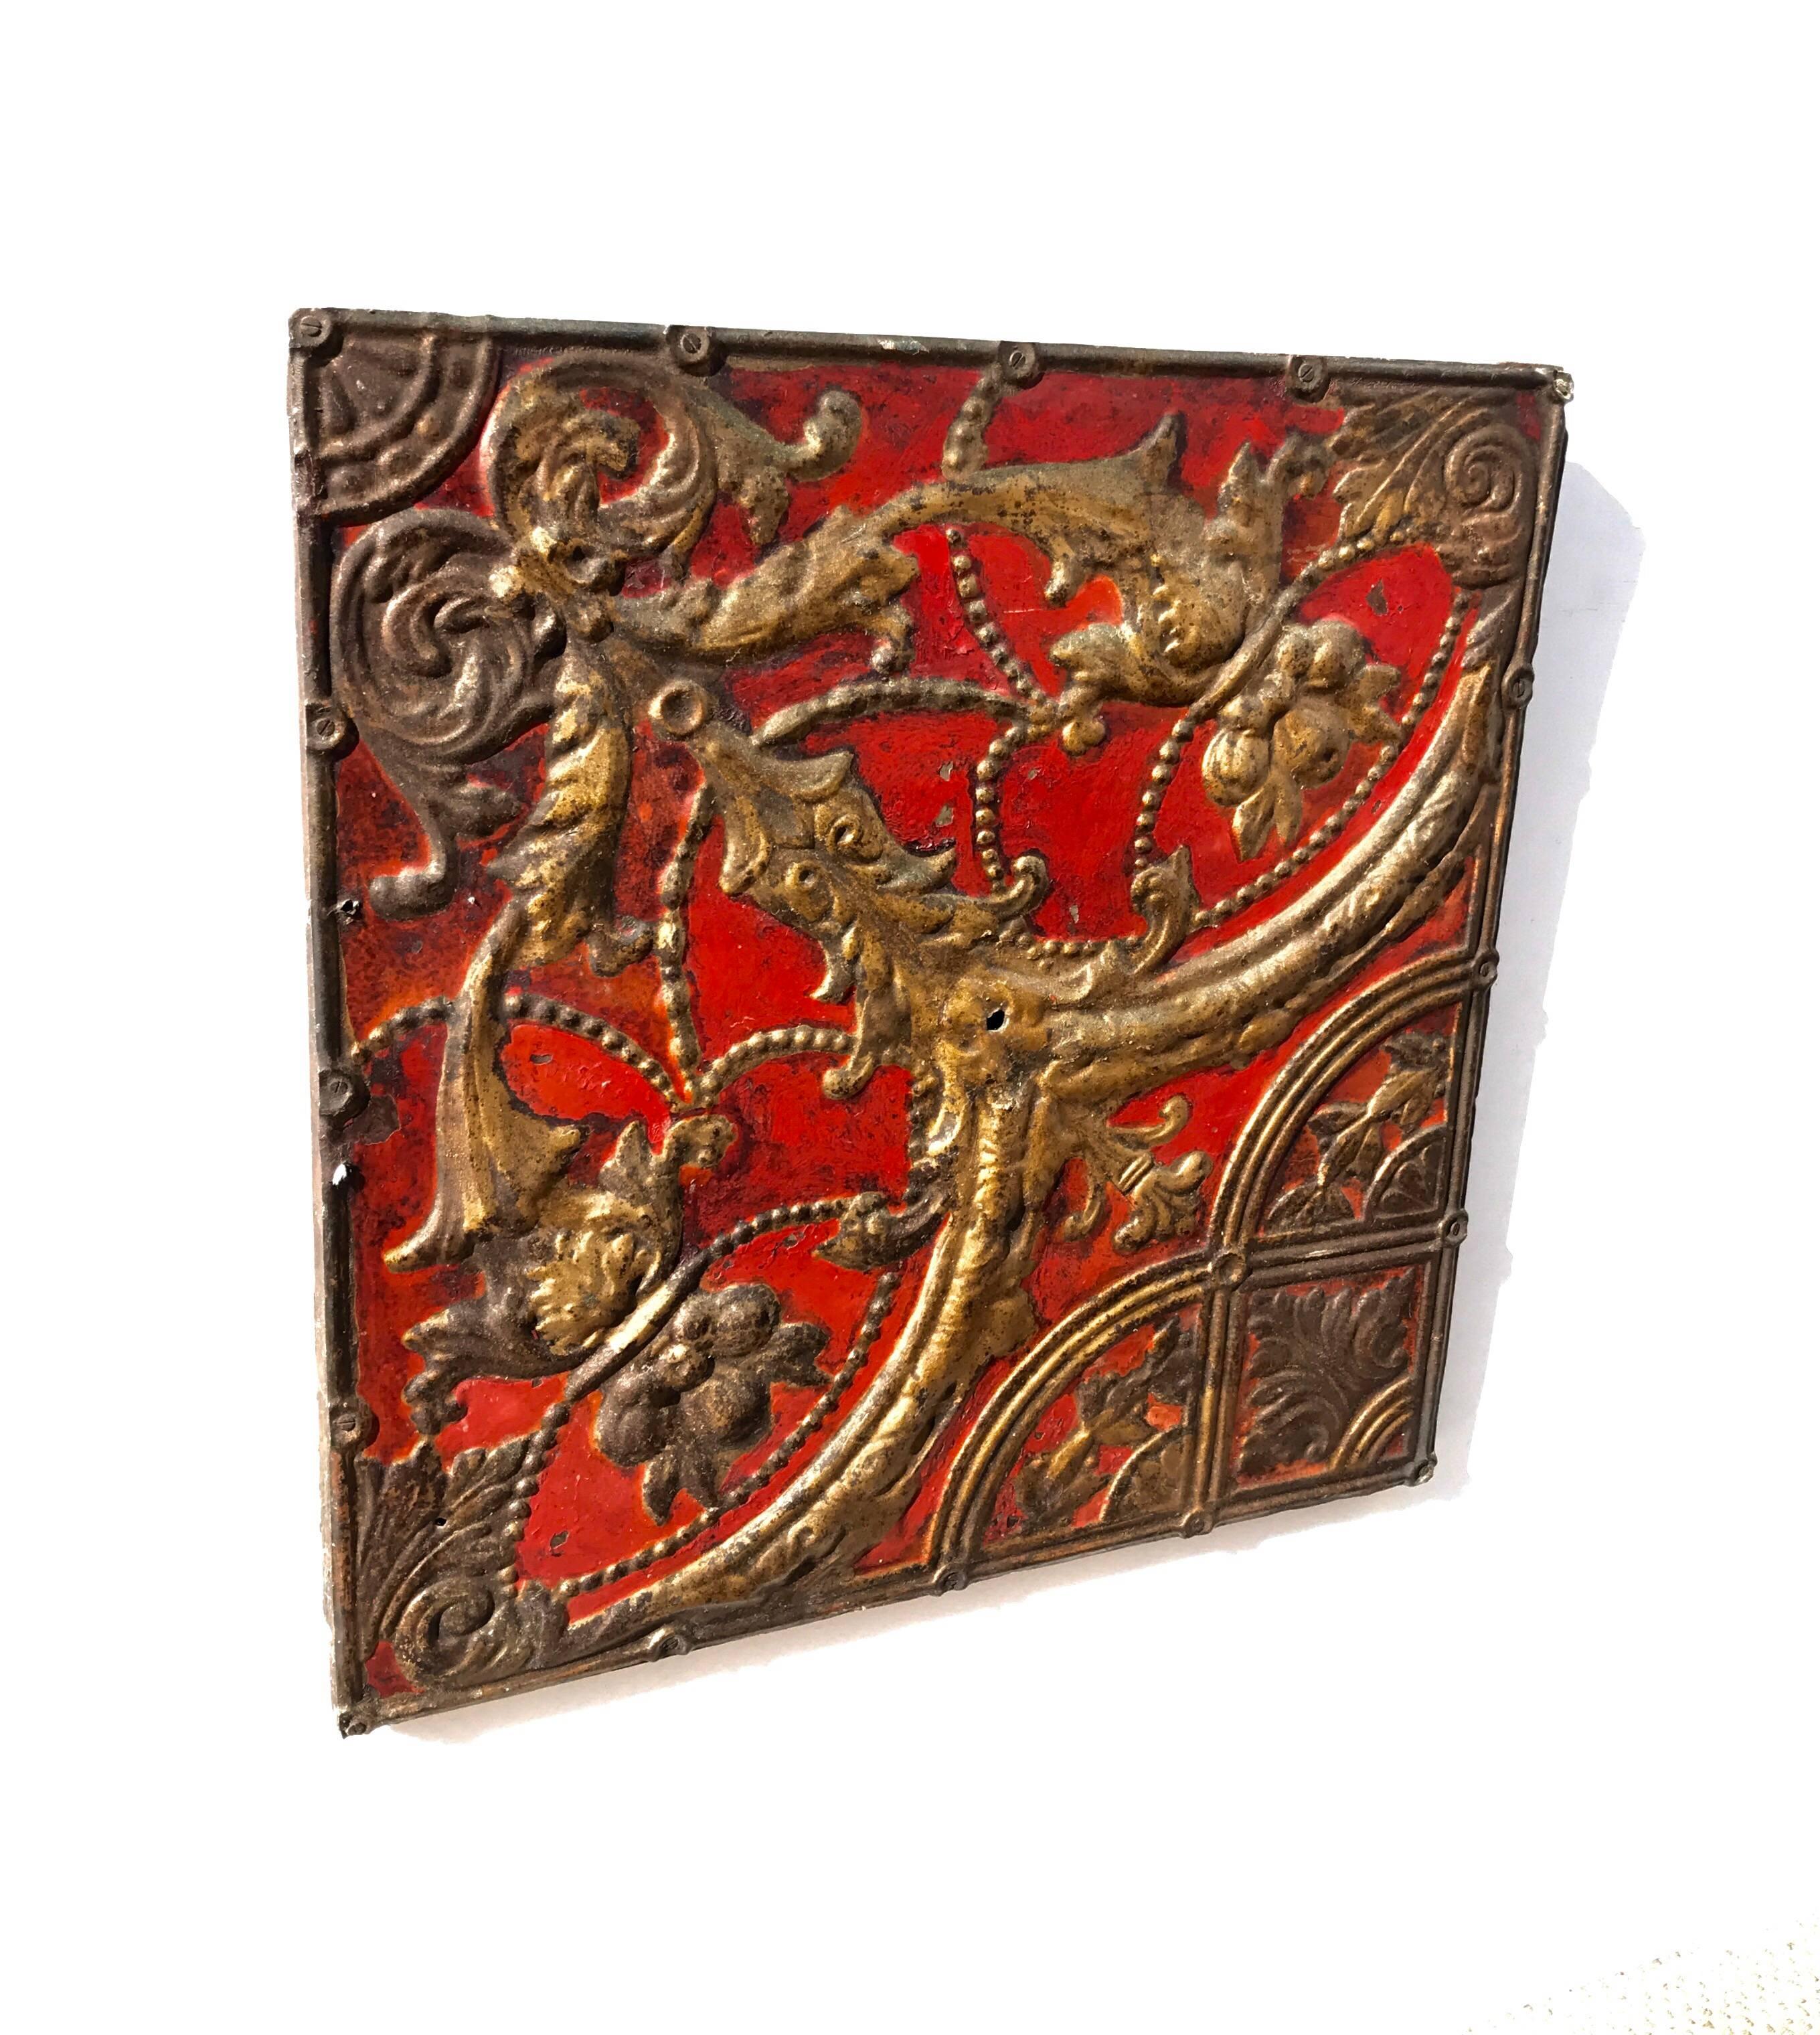 A stunning 19th century tin ceiling tile with hand-hammered beading accents and vibrant yet warm old red and gold painted surface. A wonderful hanging decorative object that will add character and patina to any space.